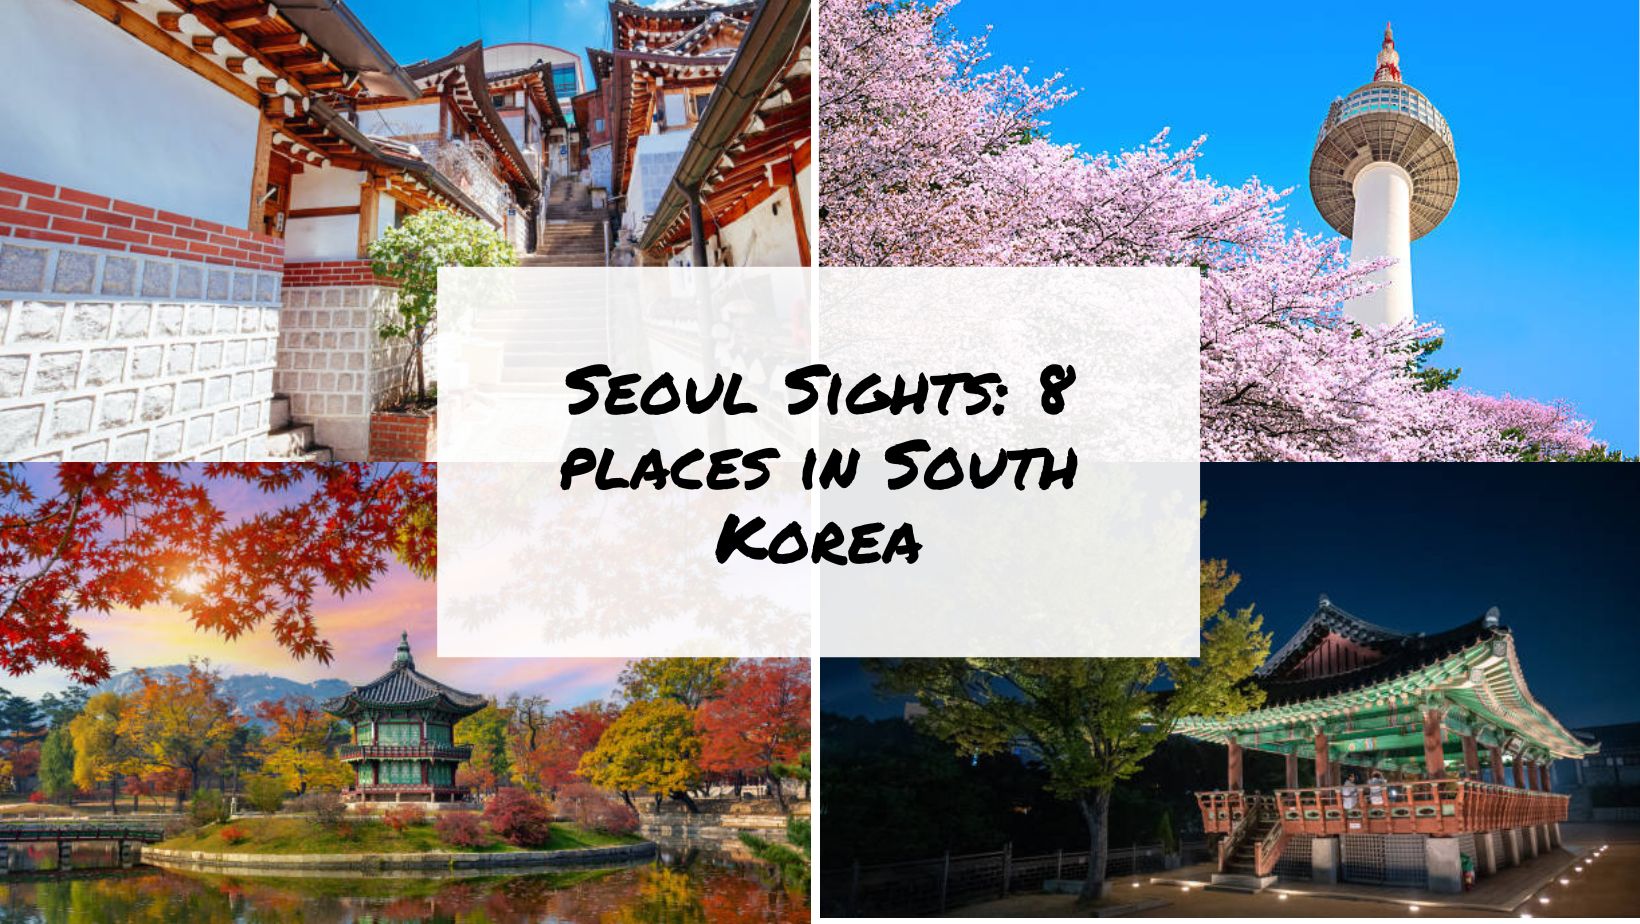 Seoul Sights 8 places in South Korea